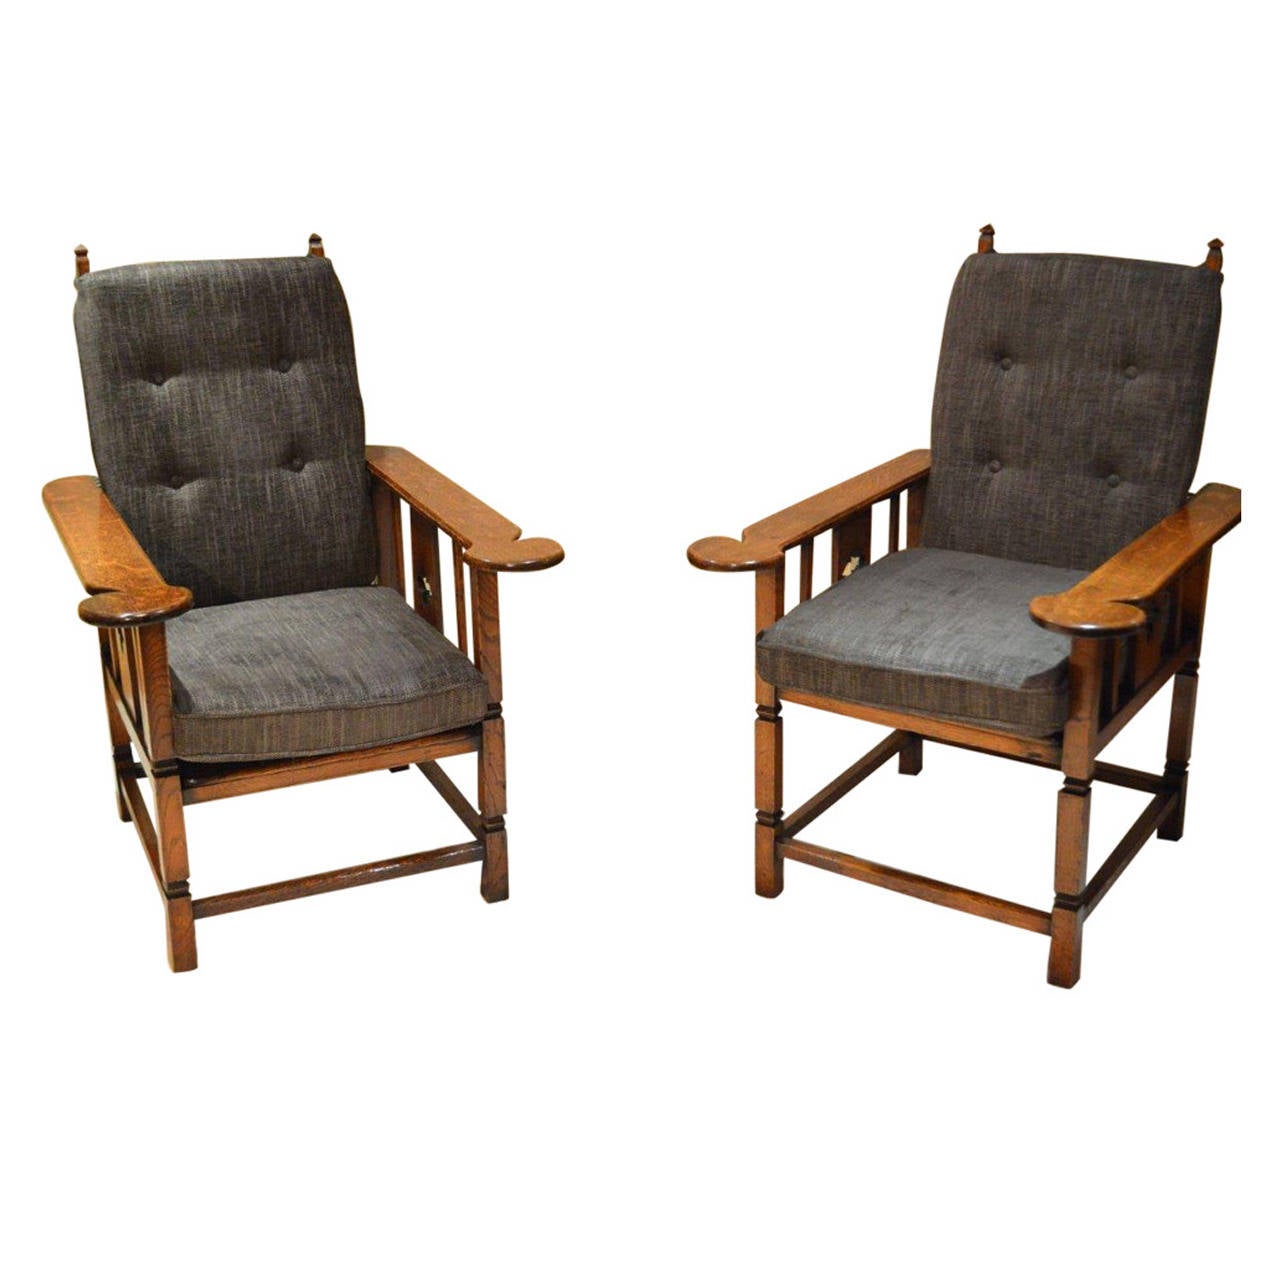 Pair of oak Arts & Crafts reclining chairs, 1900-10